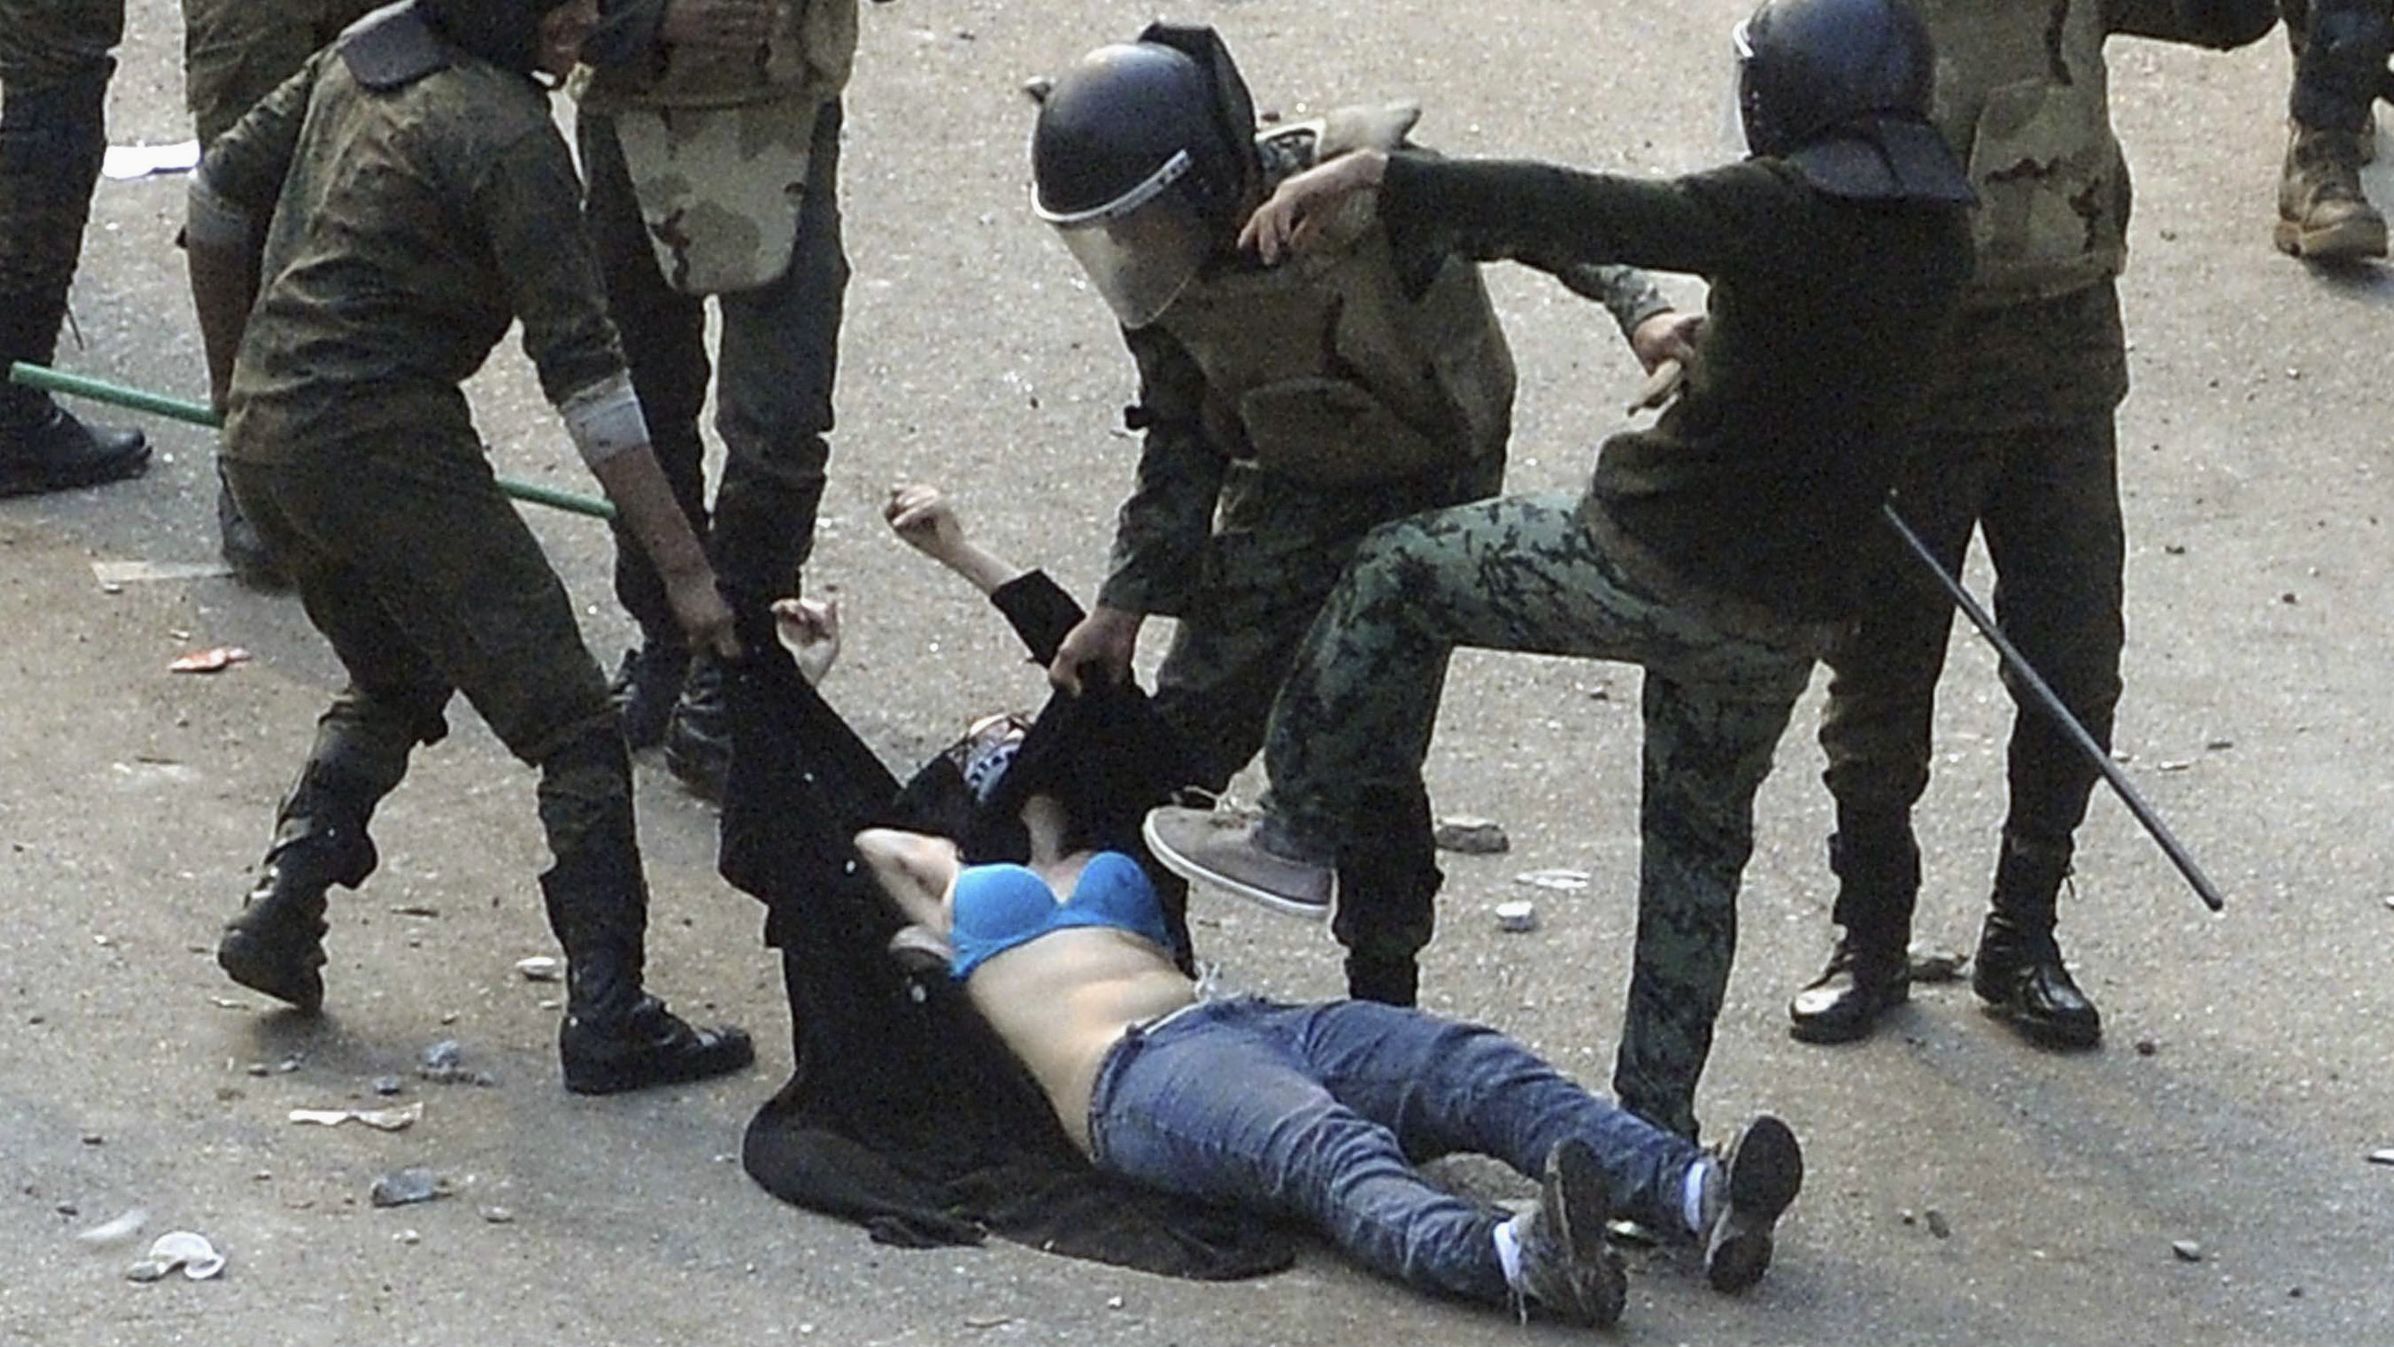 Egyptian soldiers arrest a protester during deadly clashes in Cairo's Tahrir Square in December 2011. Images of the protester being stomped <a href="https://www.cnn.com/2011/12/19/world/meast/egypt-unrest/index.html" target="_blank">stoked anger among the pro-democracy demonstrators battling Egyptian security.</a> Tahrir Square was the symbolic center of the uprising that brought down President Hosni Mubarak earlier in the year.